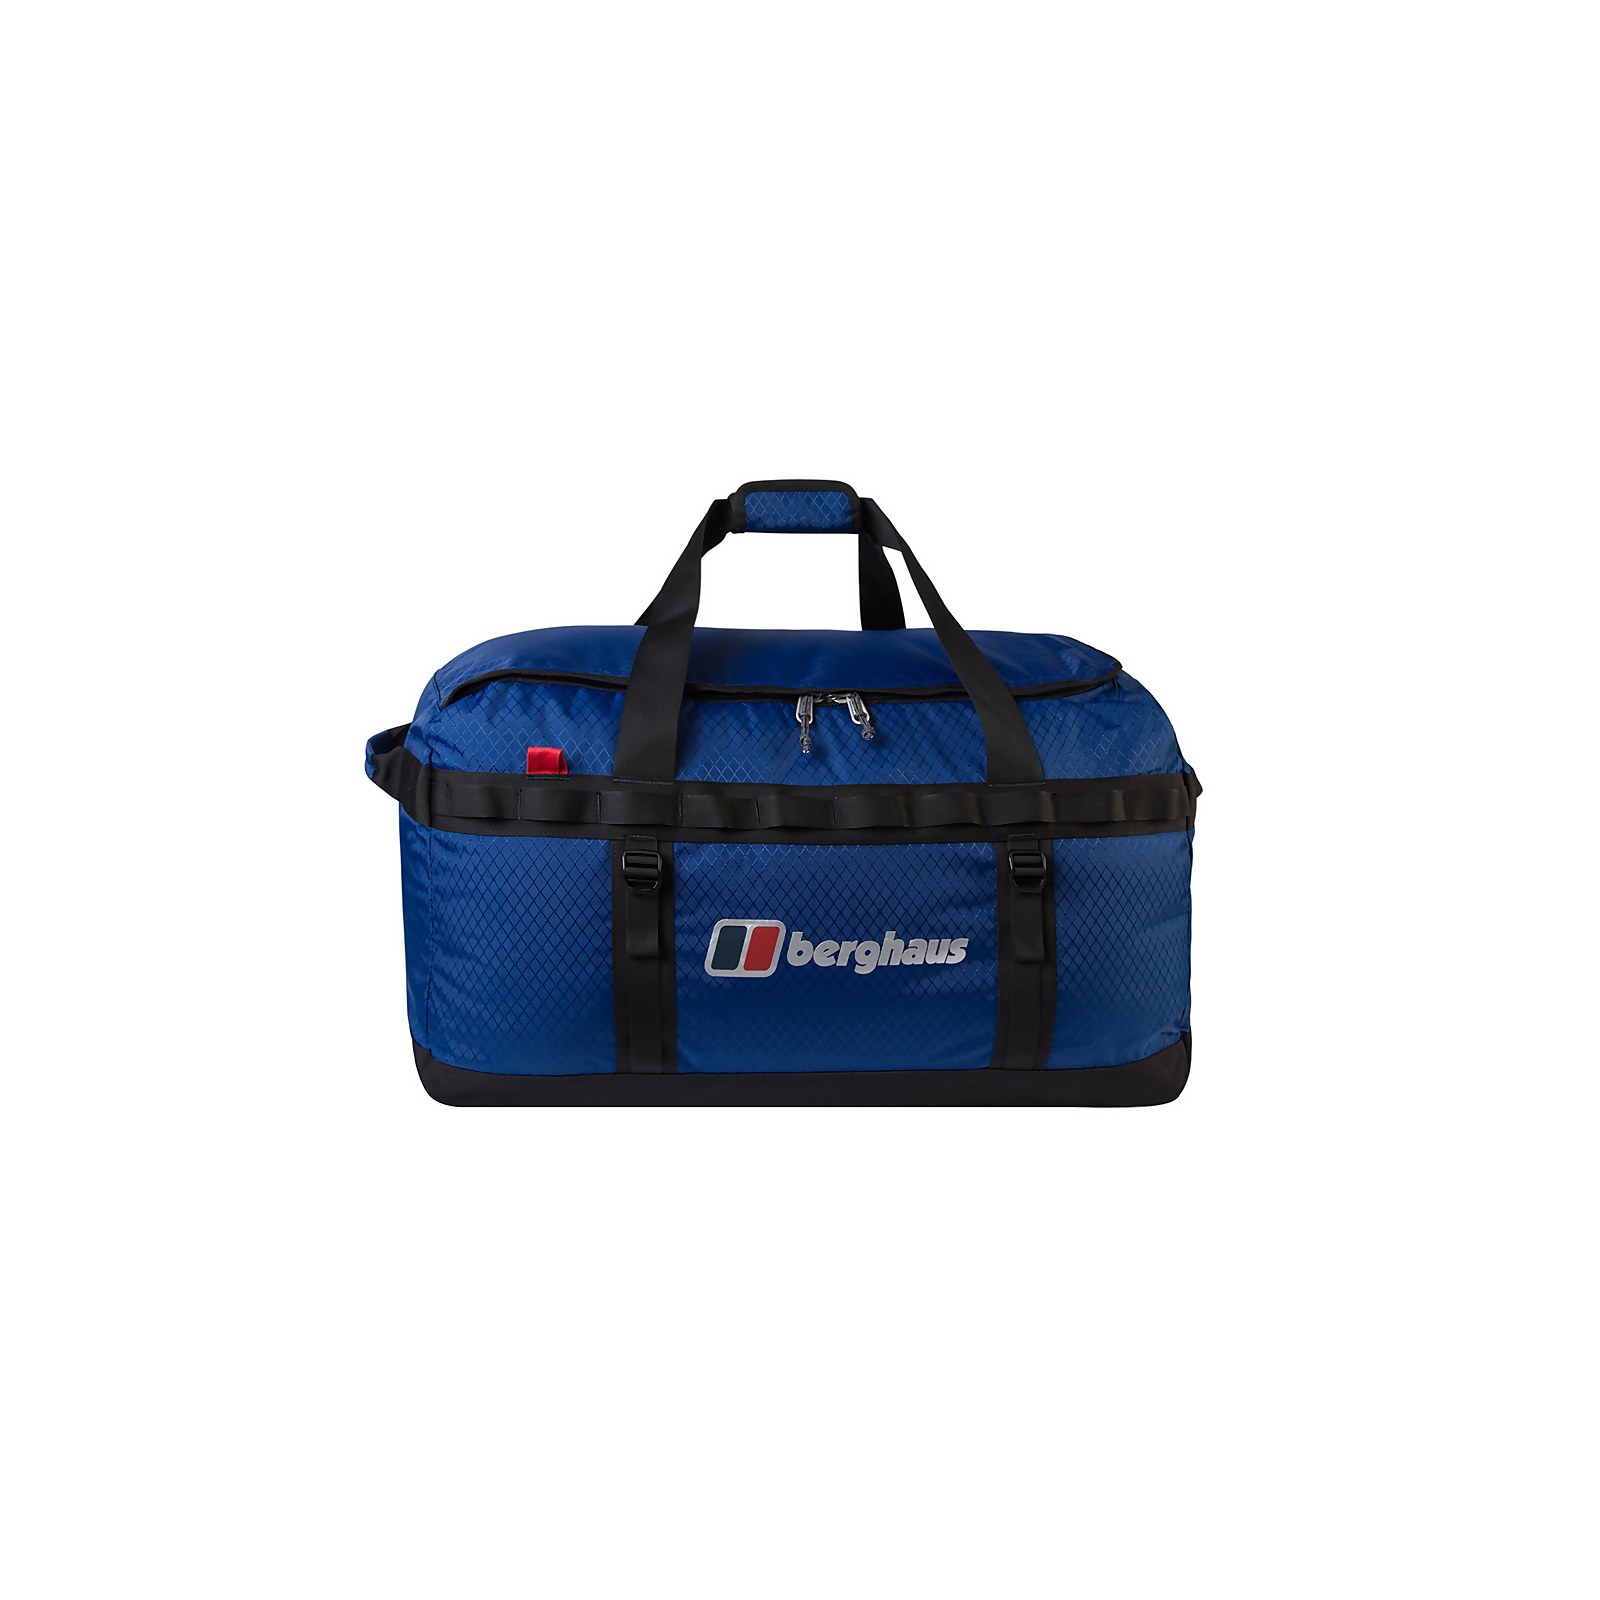 Berghaus Expedition Mule 40 - Blue / Black - One Size